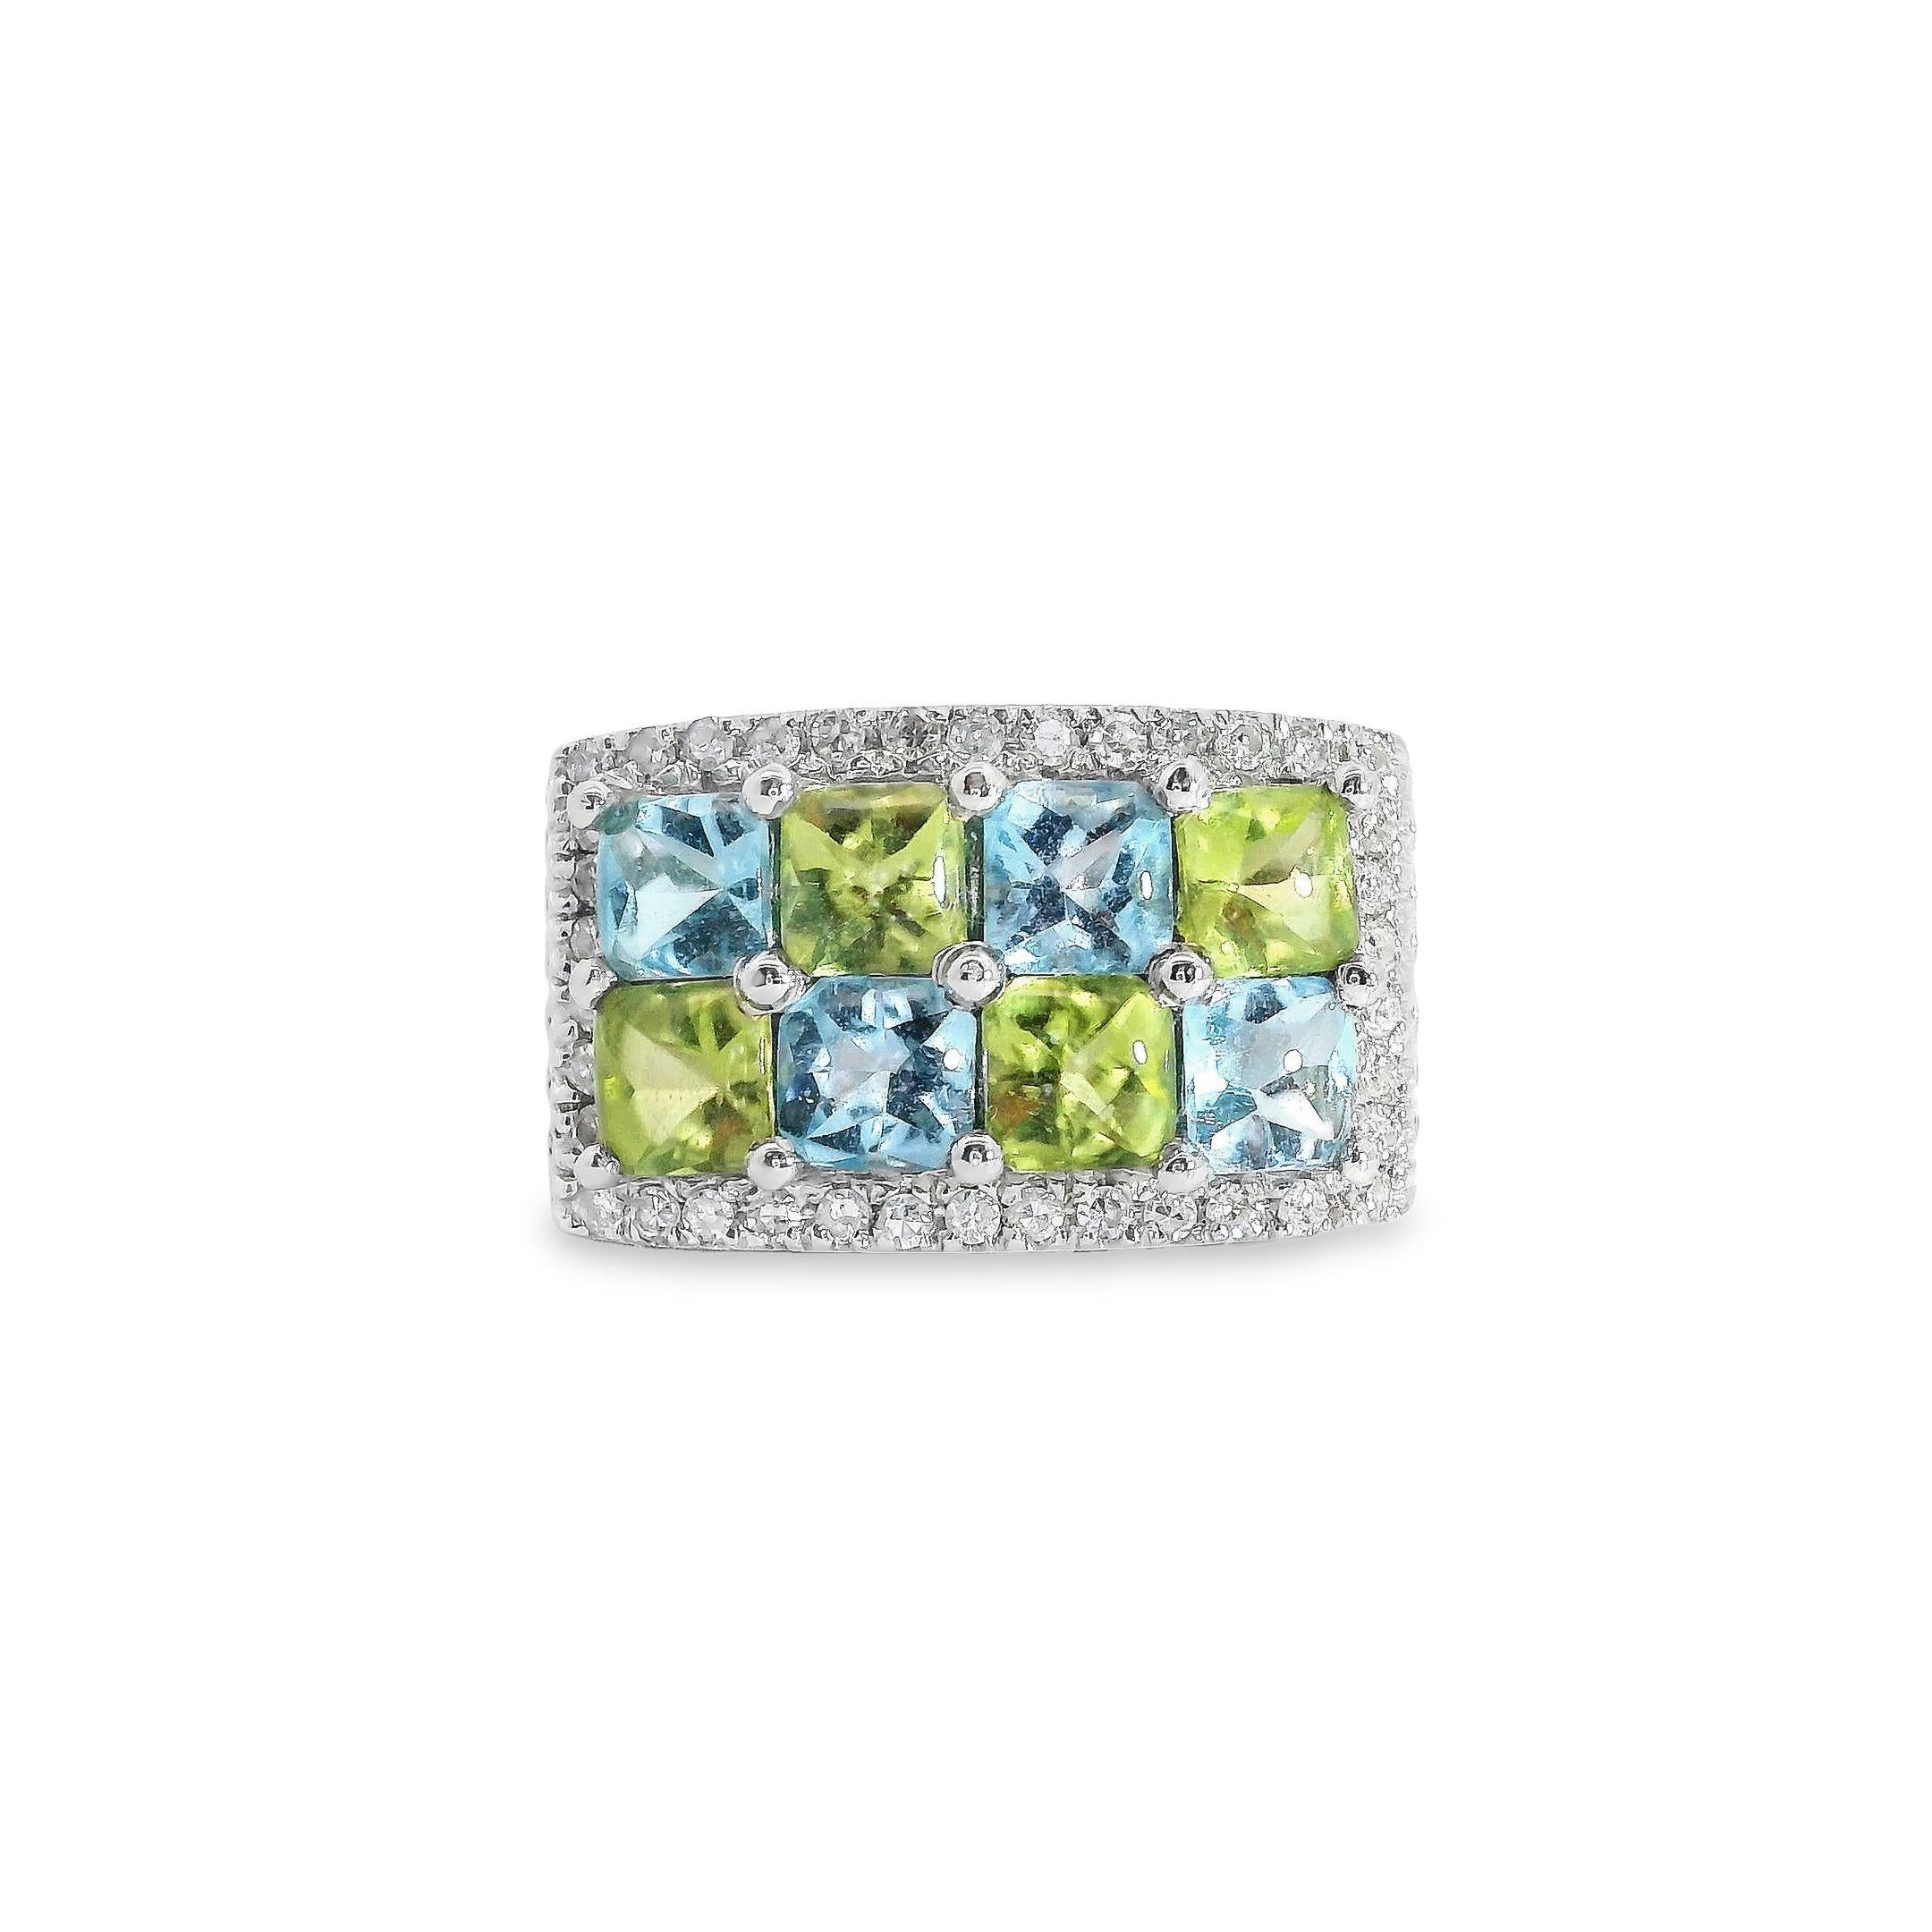 Experience the enchantment of spring with this opulent set featuring a luxurious peridot, blue topaz, and diamond ring and earrings. Immerse yourself in the splendor of nature as vibrant green and blue hues dance gracefully in these expertly cut